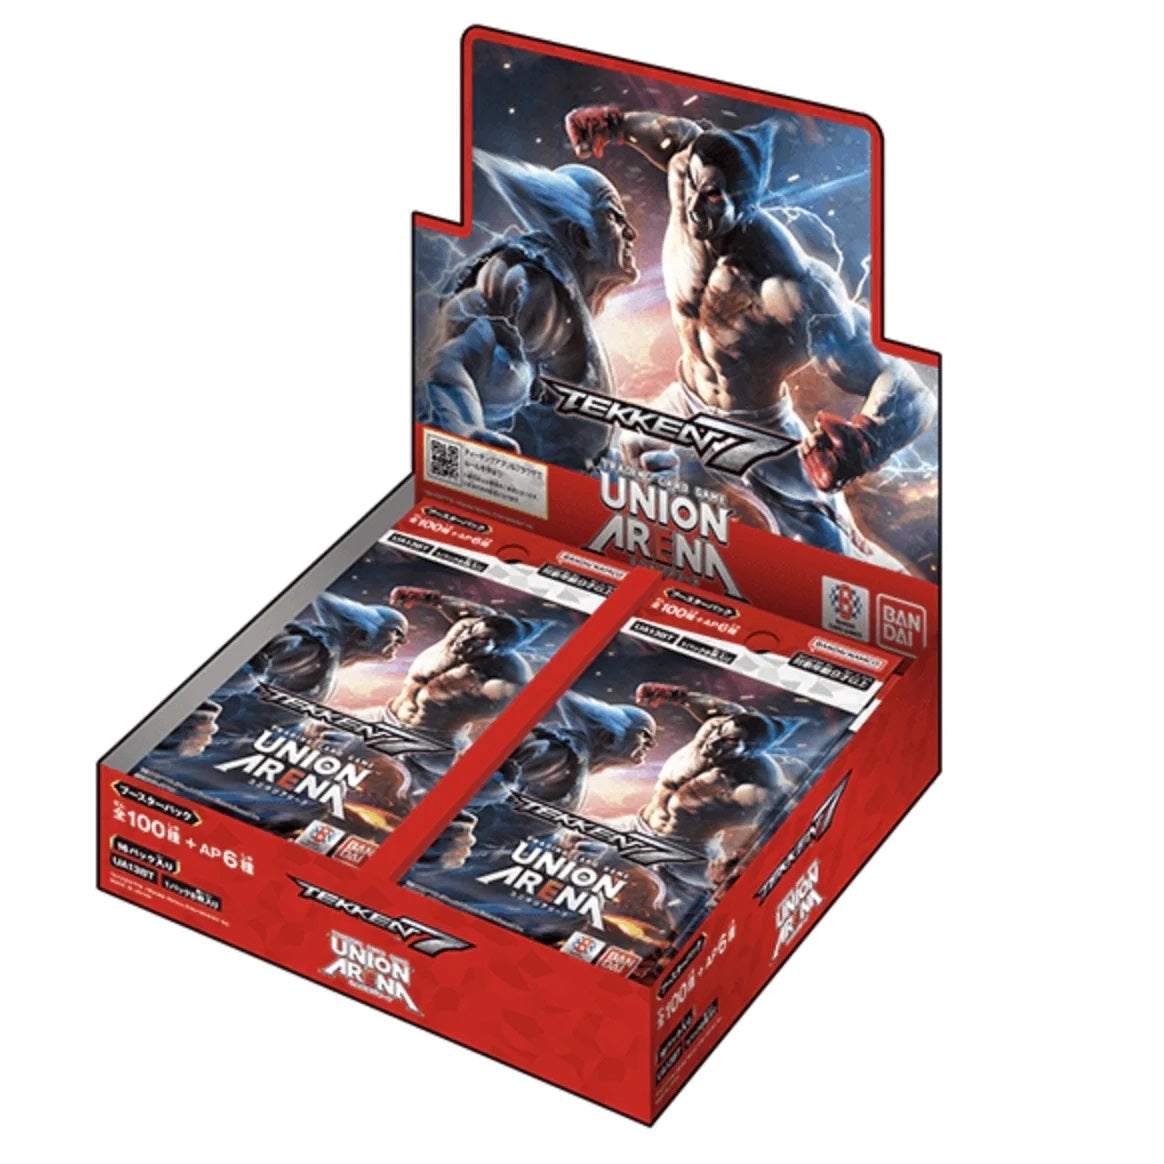 Union Arena TCG Booster "Tekken 7"-Booster Pack-Bandai Namco-Ace Cards & Collectibles